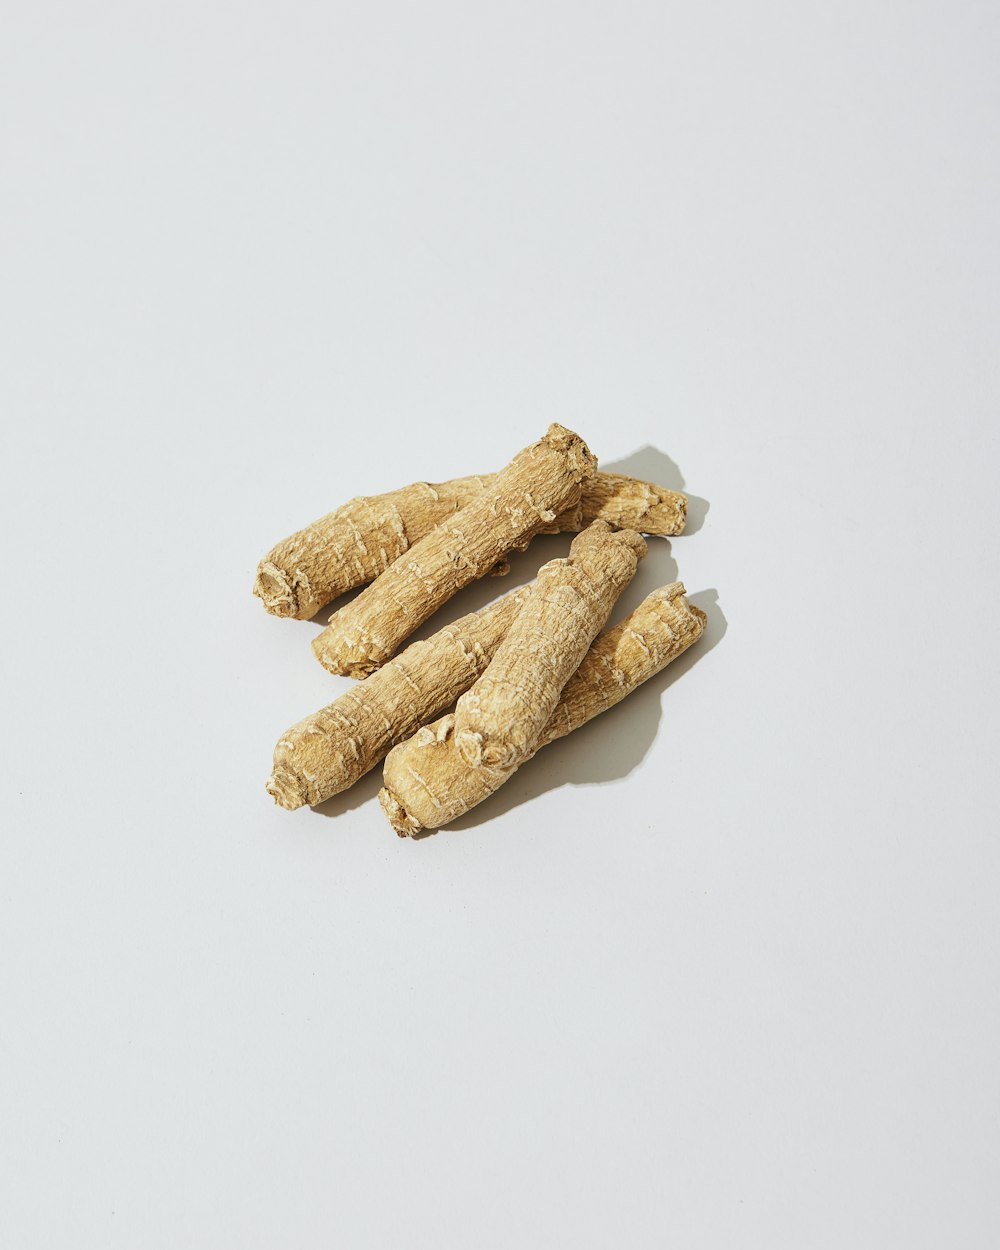 three pieces of ginger on a white surface